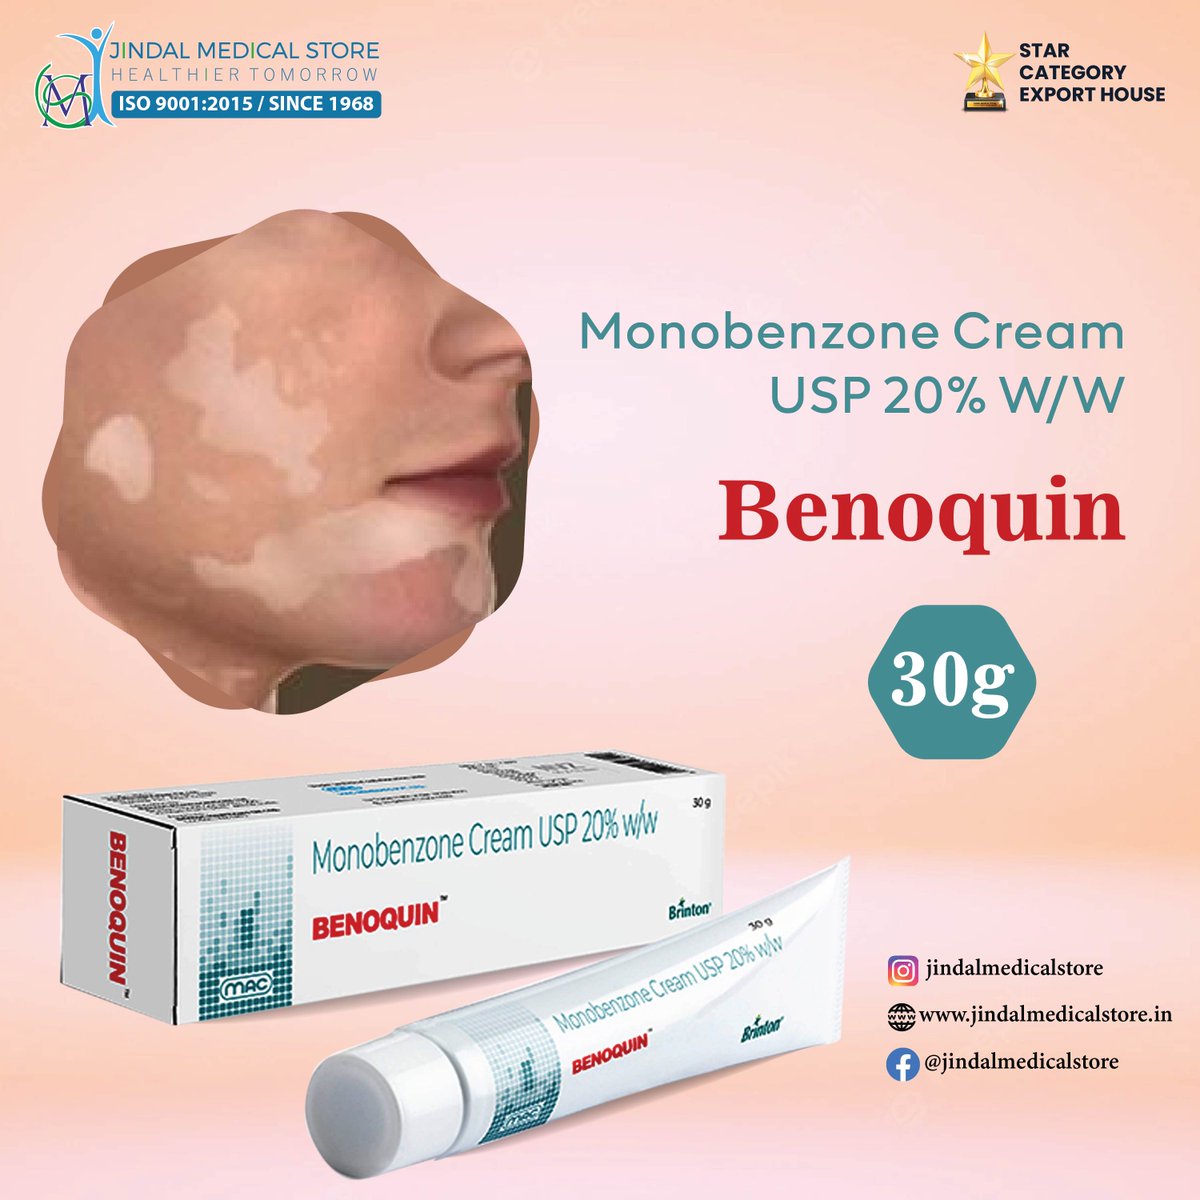 Say goodbye to vitiligo with Benoquin Ointment! Achieve permanent skin lightening by speeding up melanin removal. Embrace confidence and beauty without boundaries!

#BenoquinOintment #VitiligoSolution #SkinLightening #MelaninRemoval #SkinCare #SkinHealth #JindalMedicalStore #JMS